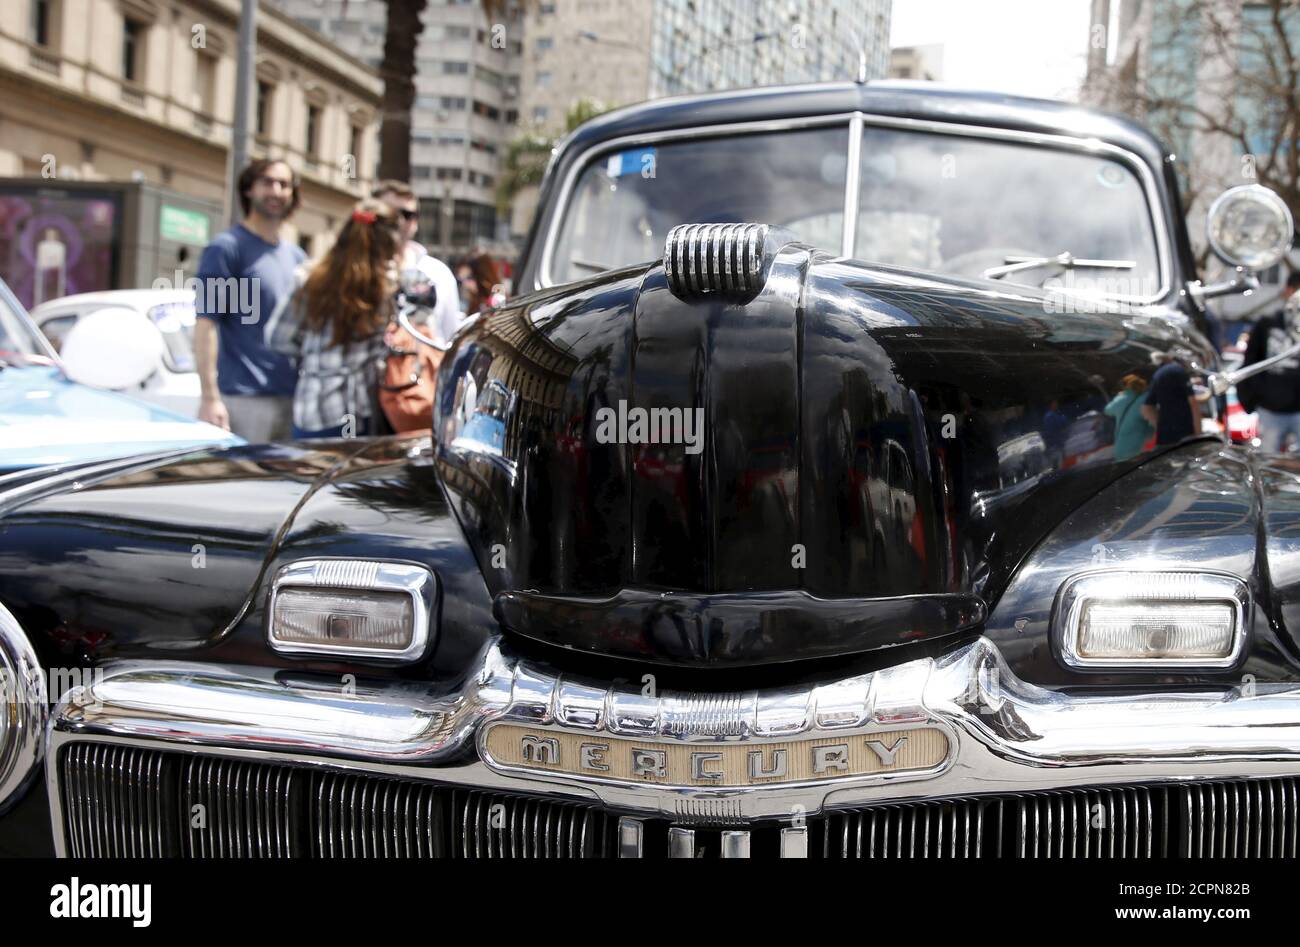 People observe a 1947 Mercury during the 25th edition of the '1000 millas sport e historicos' (1000 miles sports and classic) race in Montevideo, October 28, 2015. The race will cover 1000 miles from 28 to 31 of October.  REUTERS/Andres Stapff Stock Photo